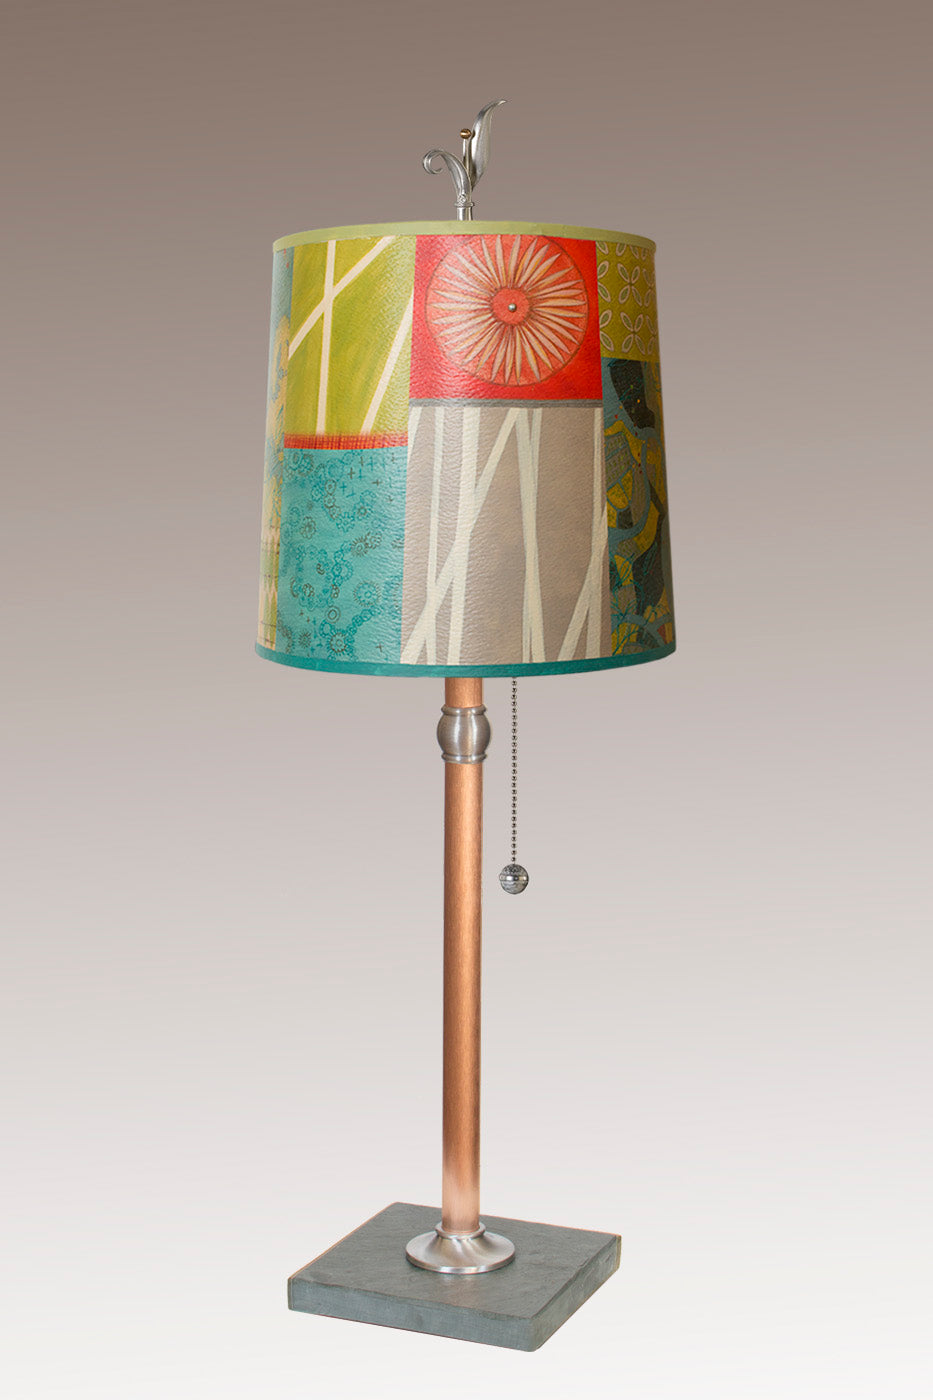 Janna Ugone &amp; Co Table Lamps Copper Table Lamp with Medium Drum Shade in Zest